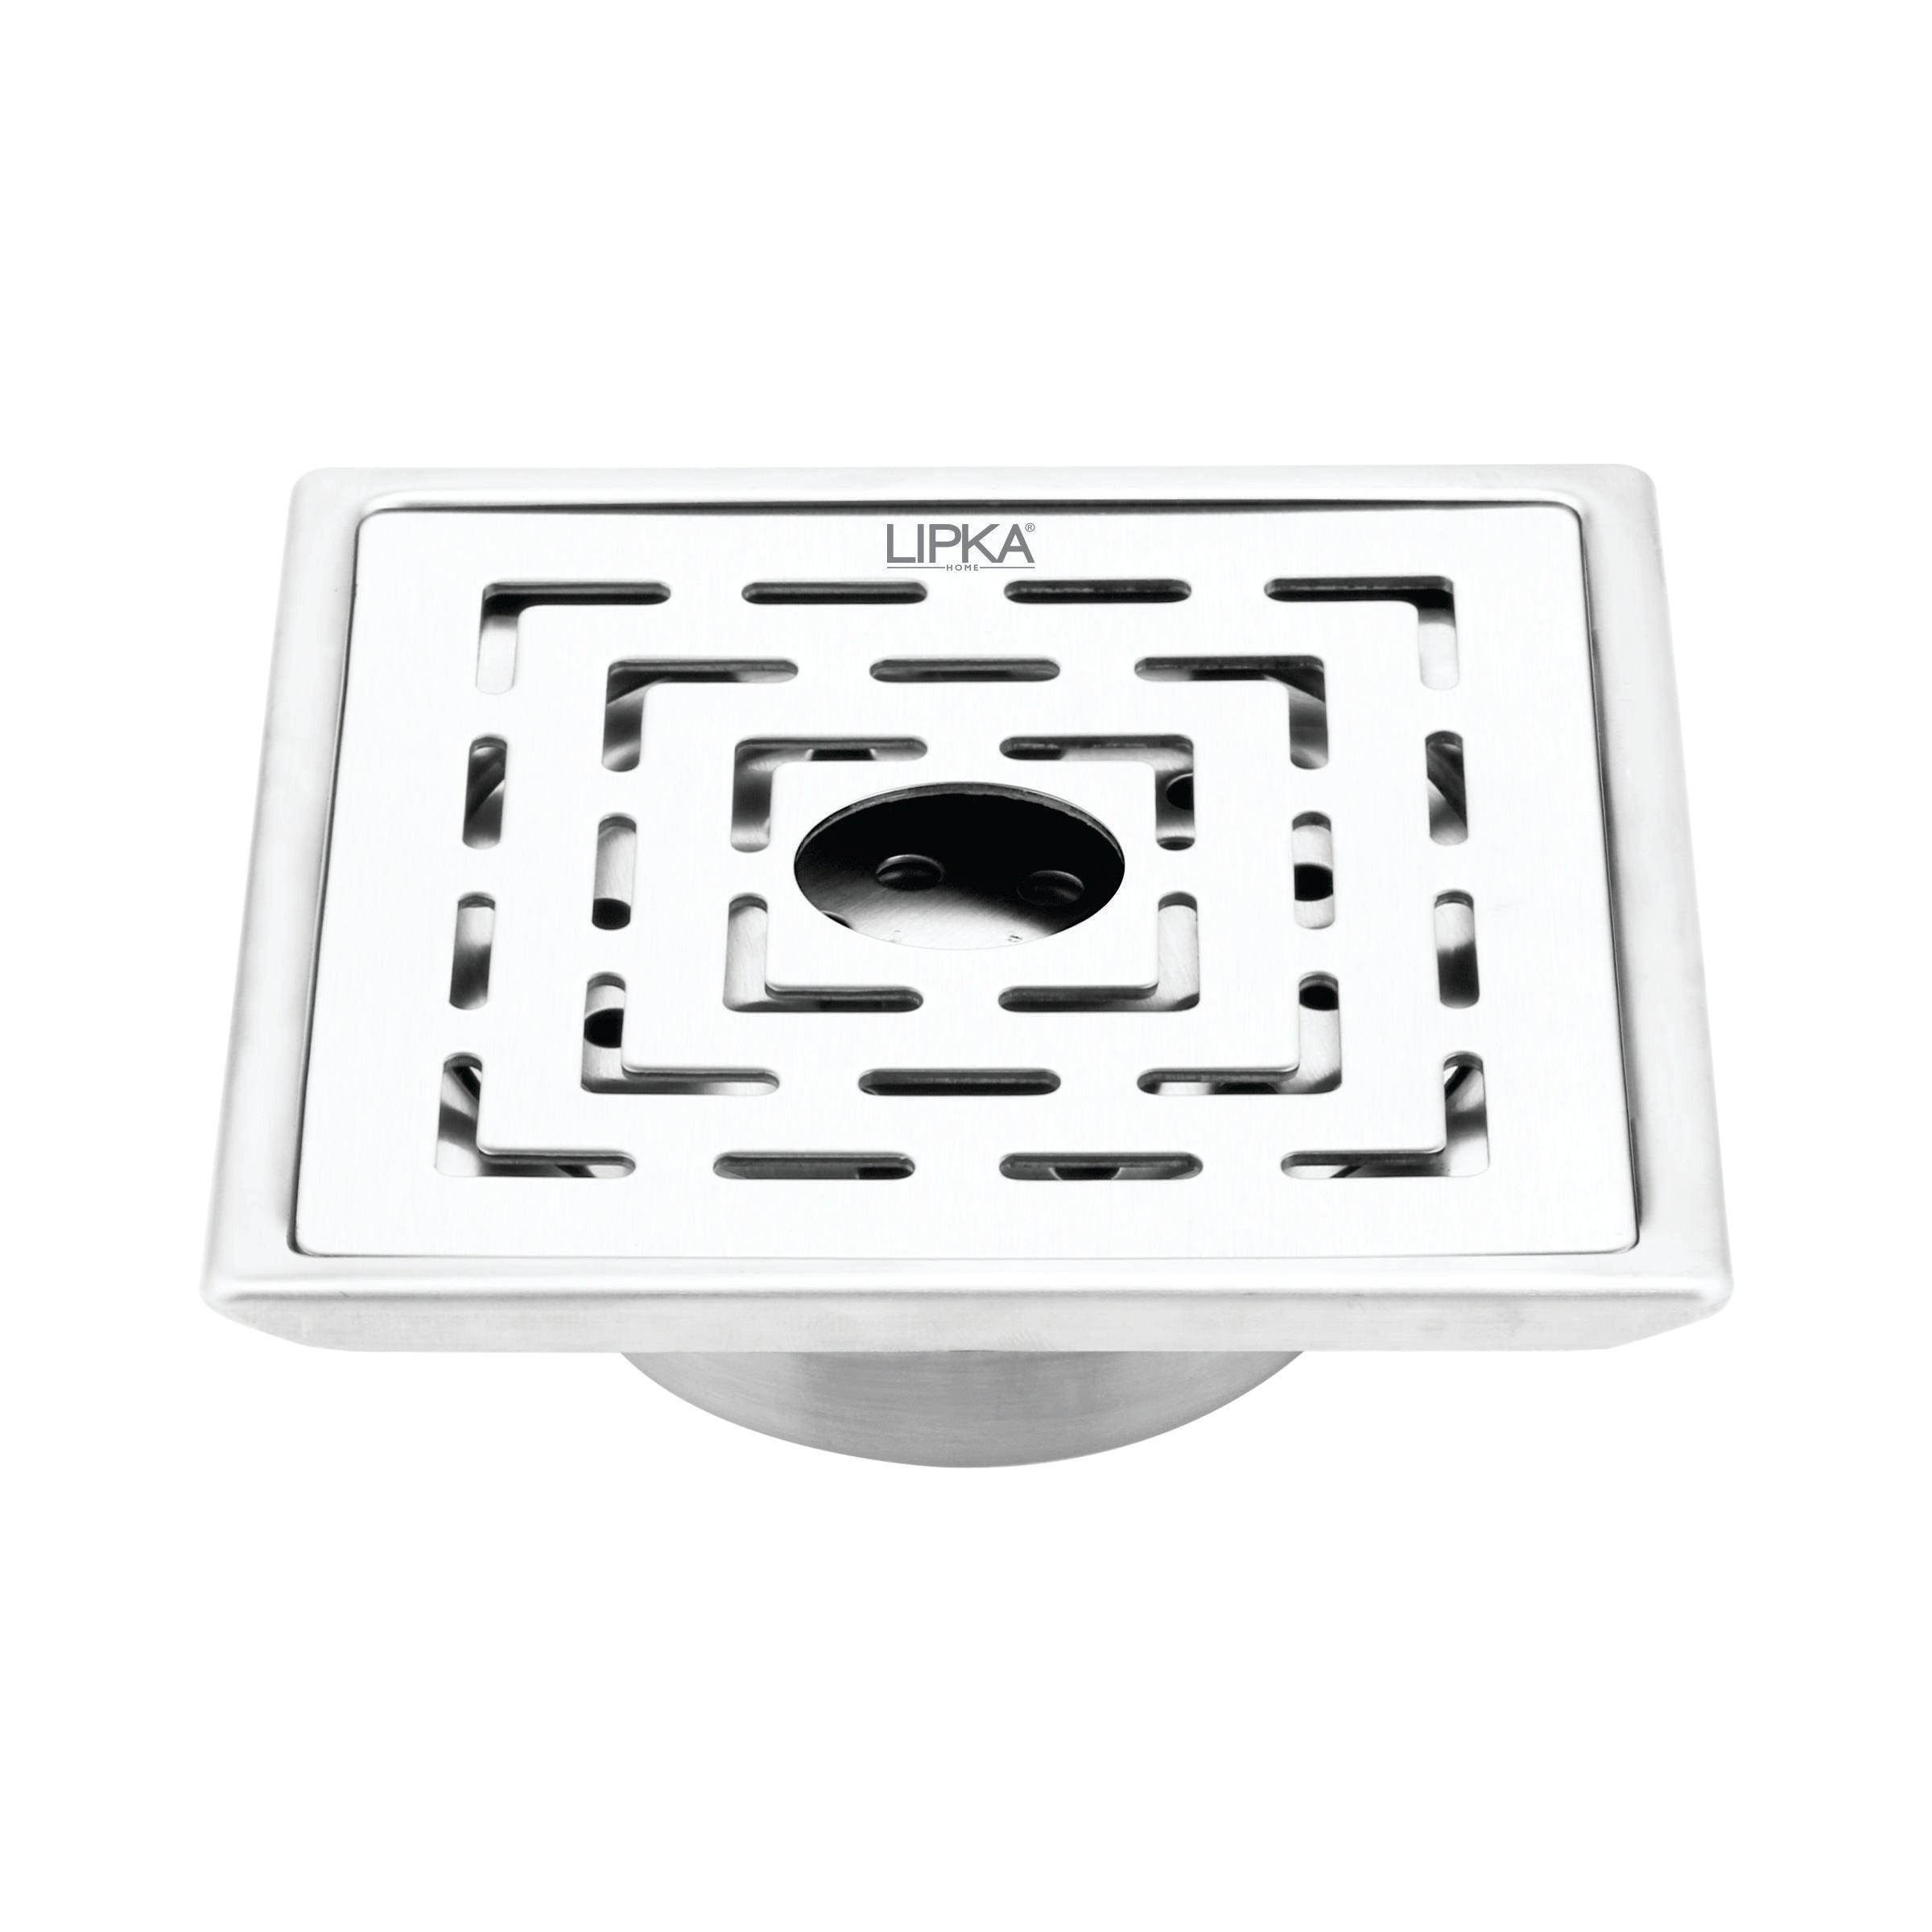 Orange Exclusive Square Floor Drain (6 x 6 Inches) with Hole and Cockroach Trap